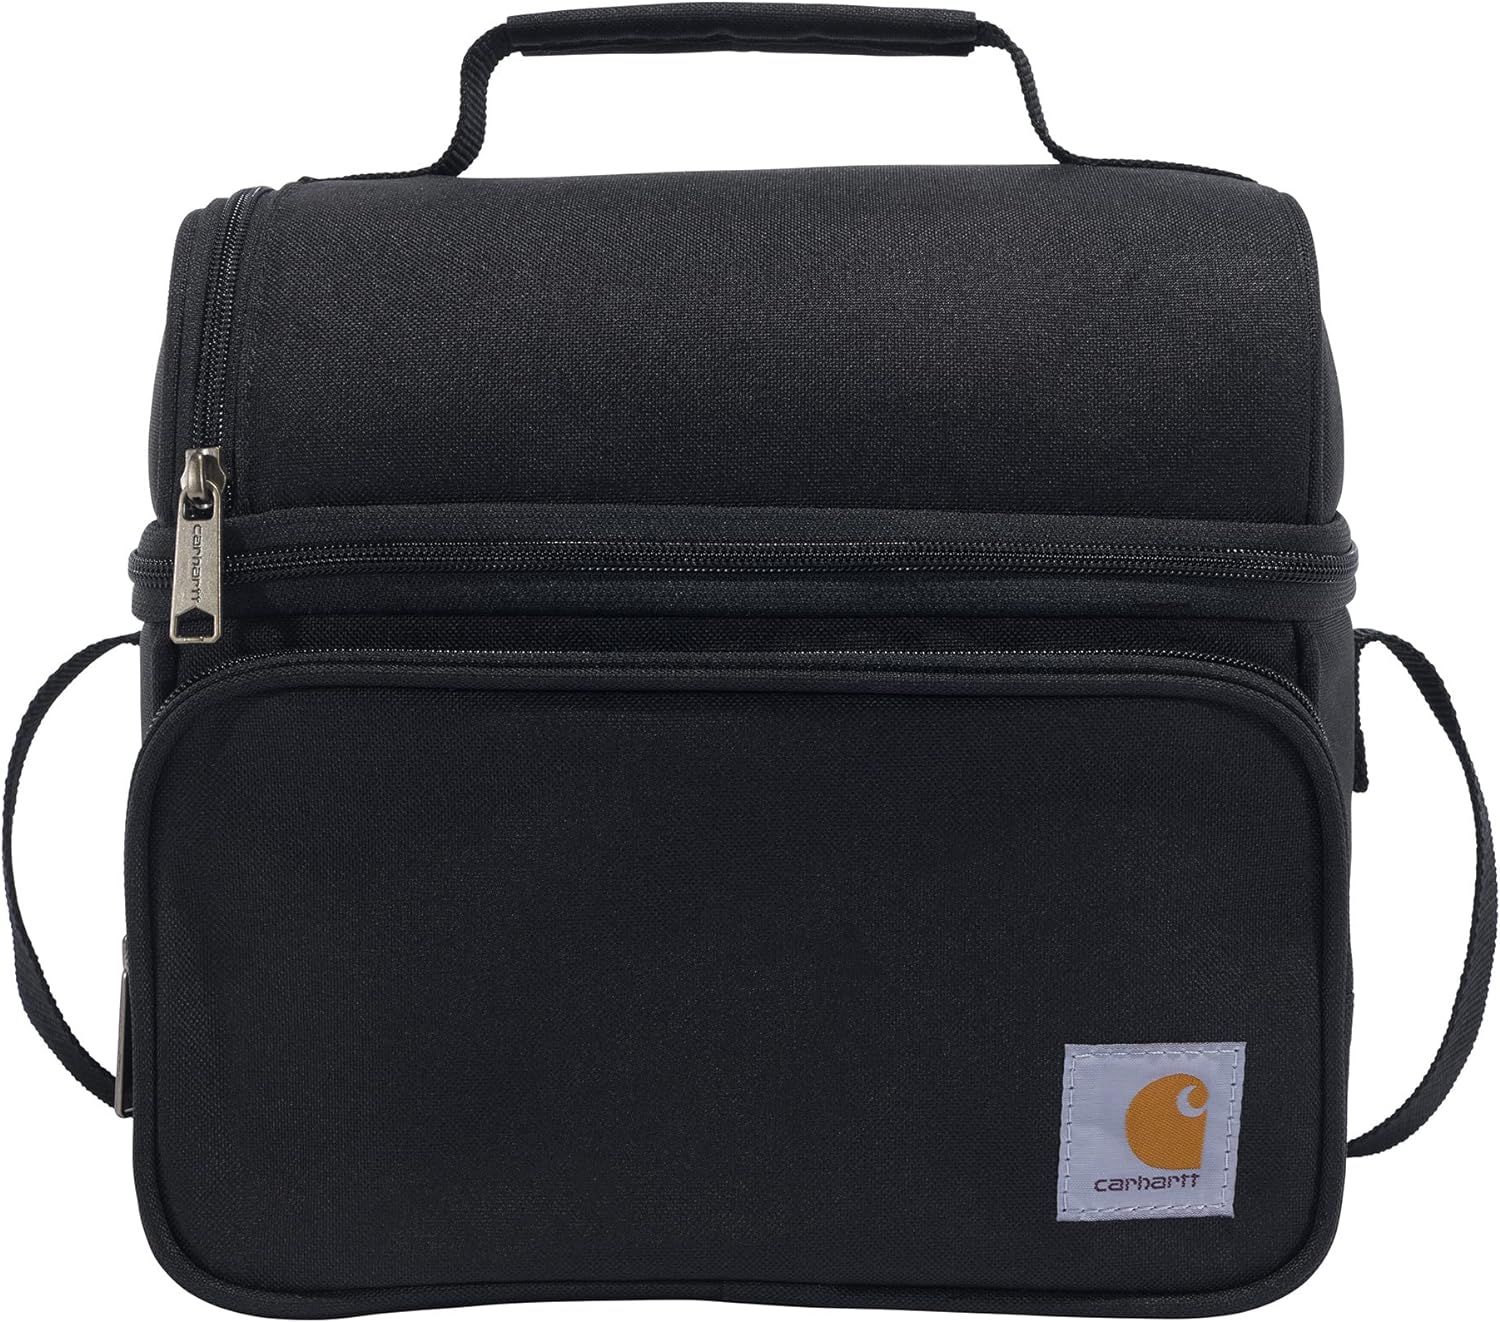 Carhartt Deluxe Dual Compartment Insulated Lunch Cooler Bag, Black | Amazon (US)